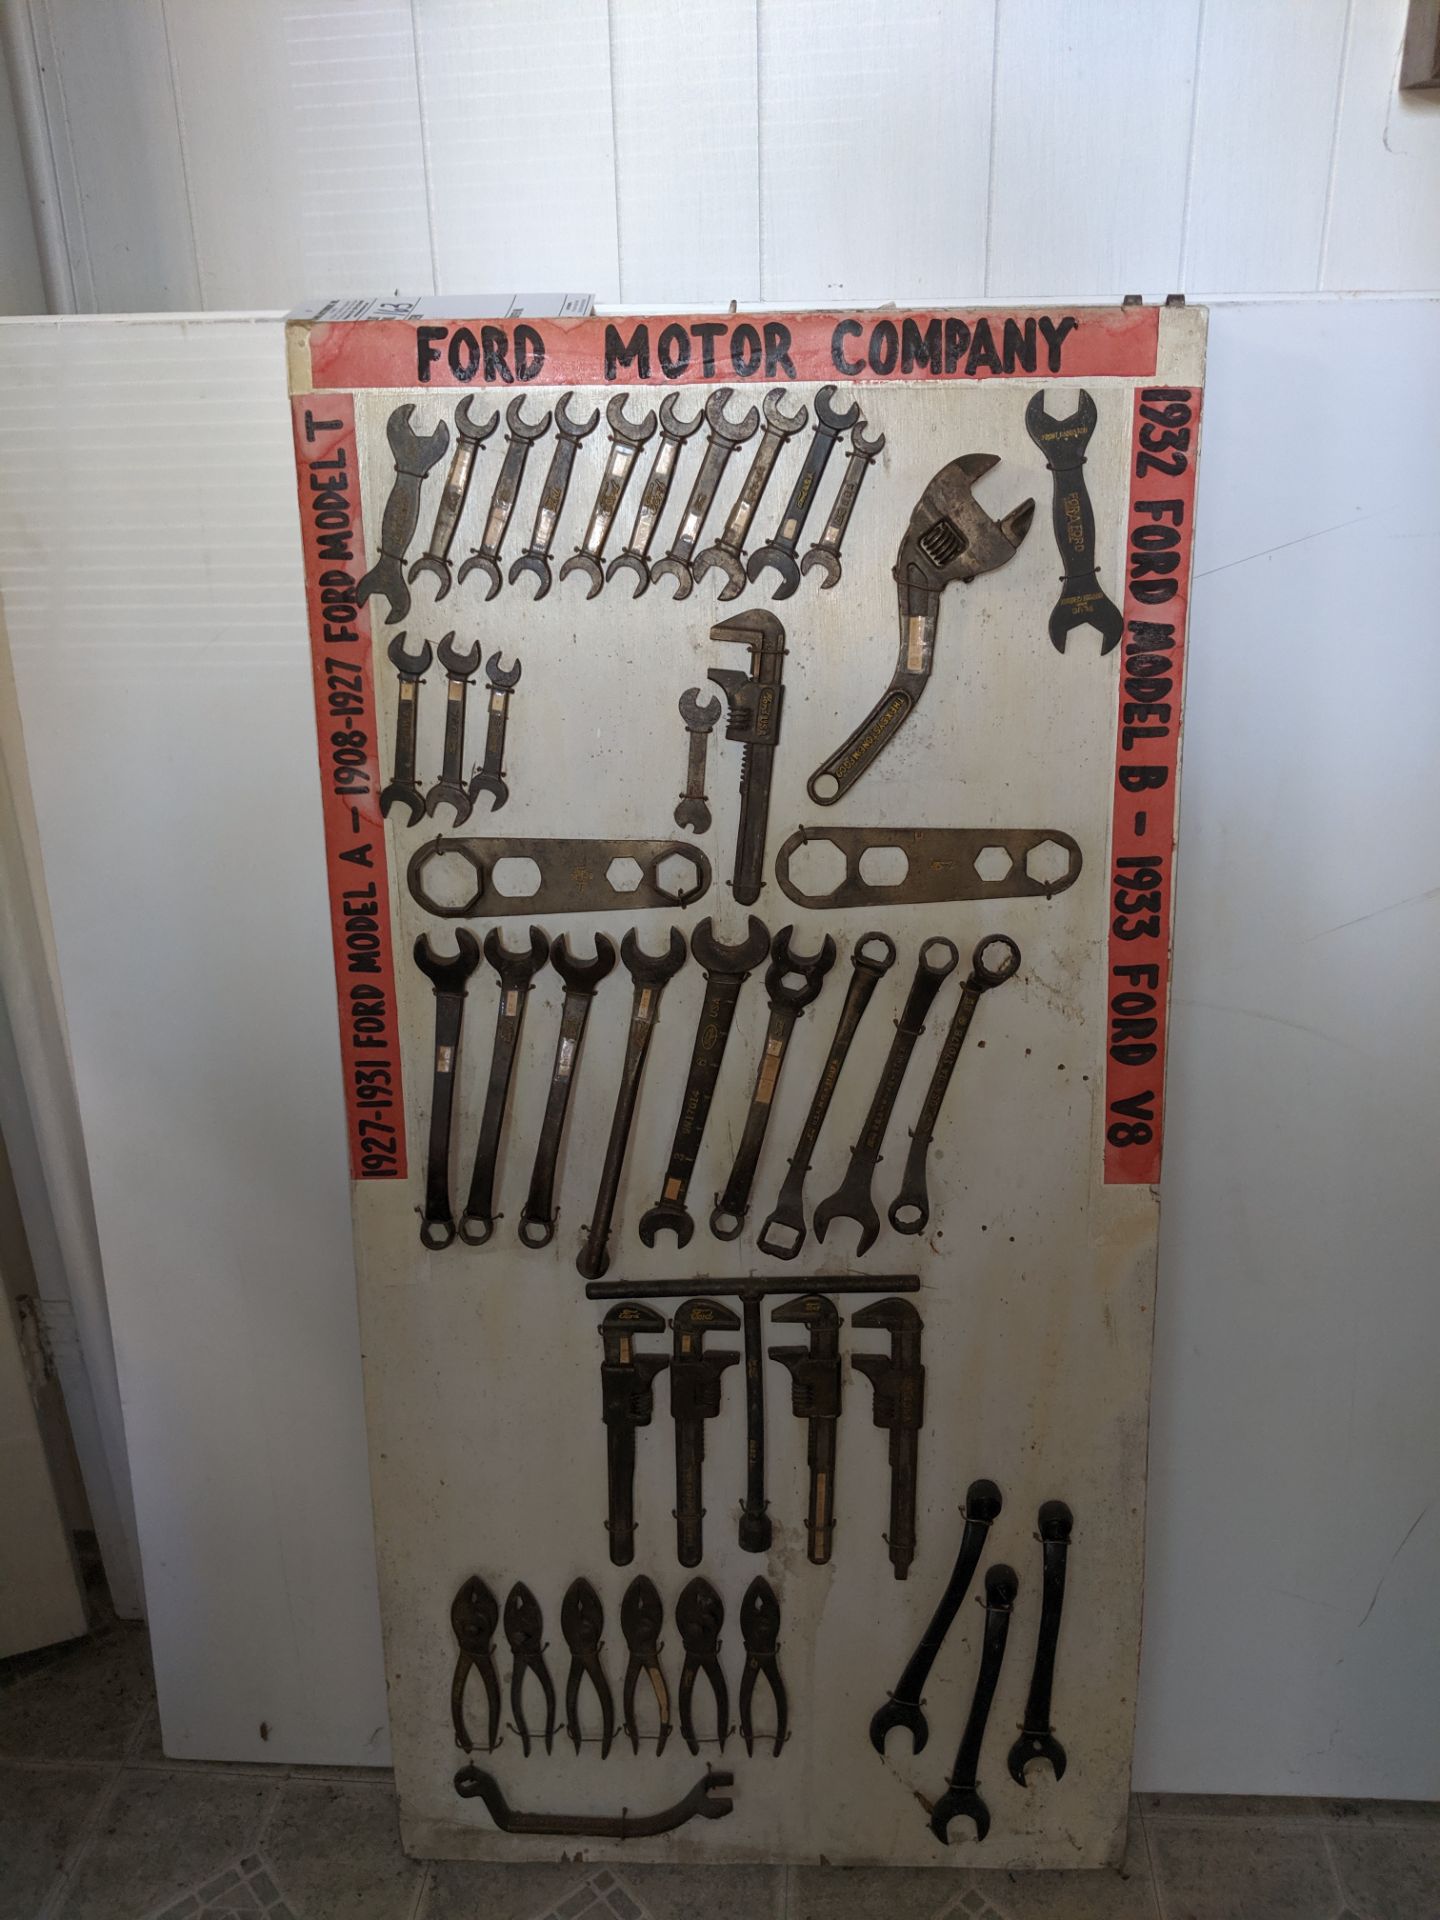 Large display of Ford Motor Company wrenches